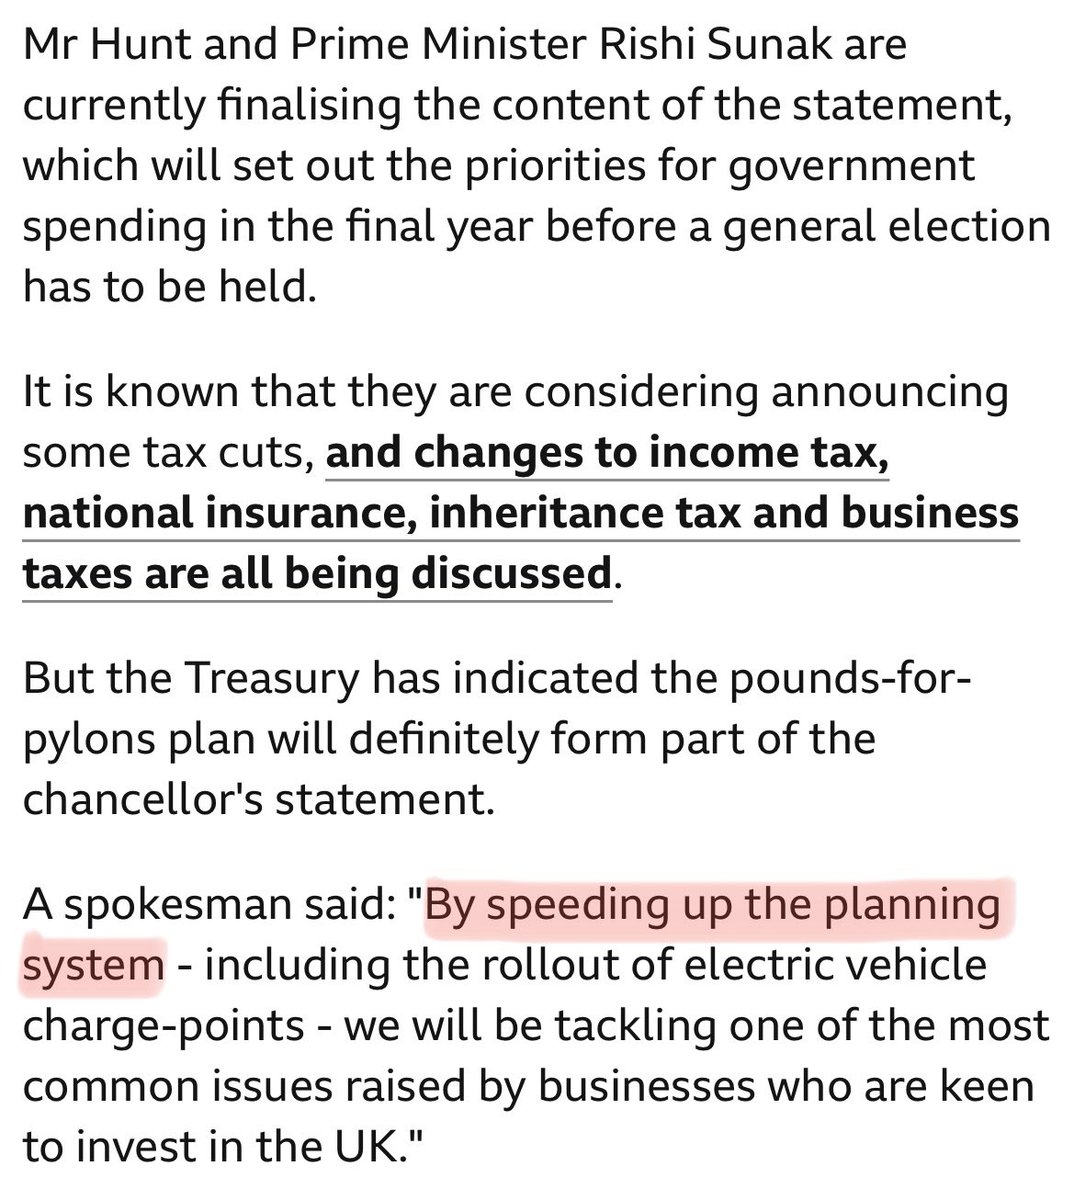 That didn’t take long: only 24 days since Royal Assent for the Levelling-up and Regeneration Act and its many planning reforms, and there’s already more talk of ‘speeding up the planning system’ (bbc.in/3MOPnhM).